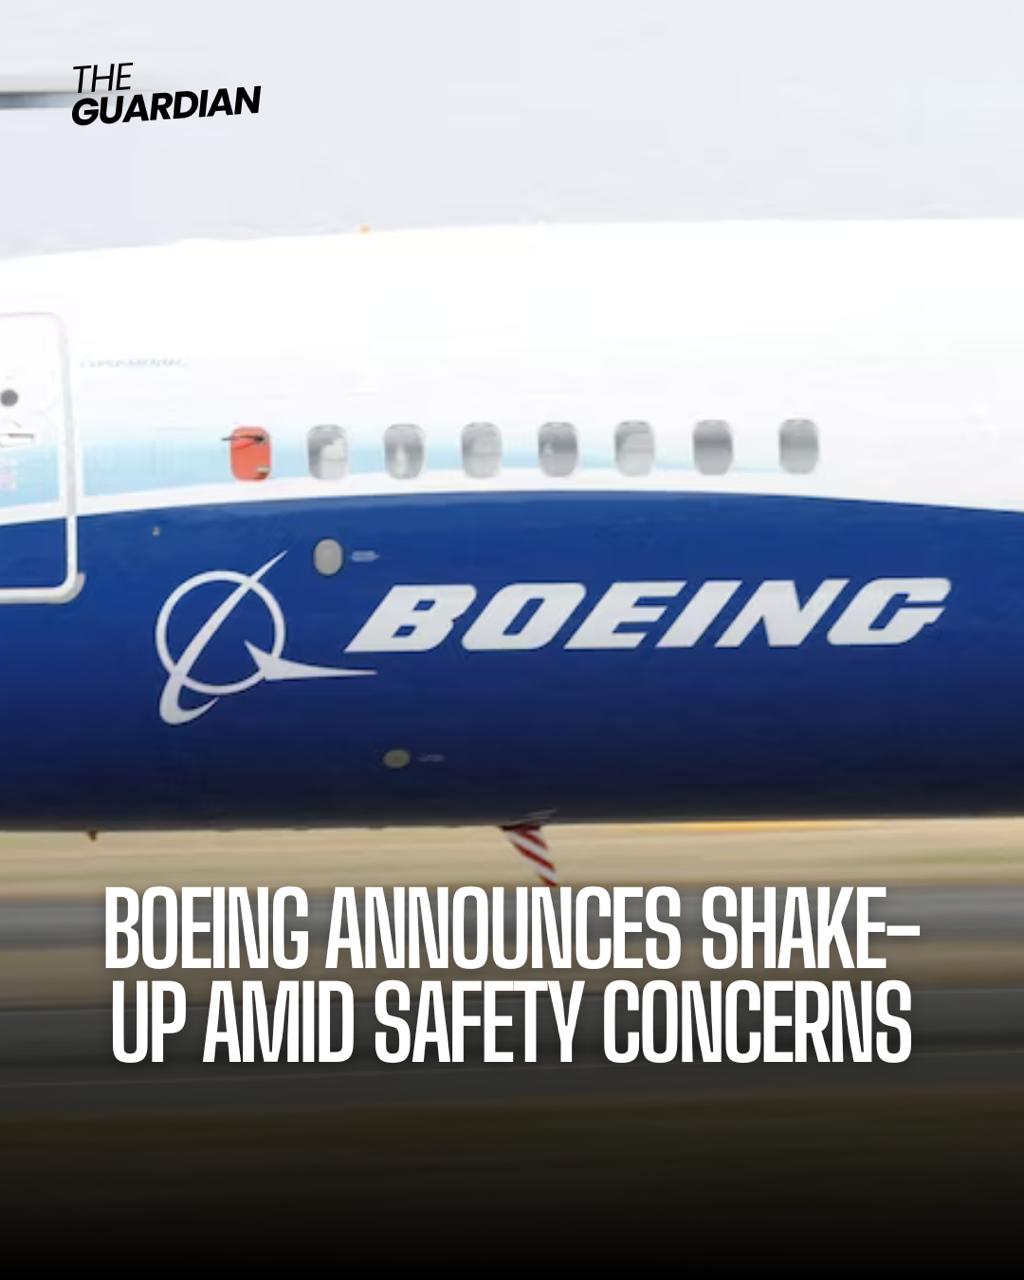 The head of Boeing's troubled 737 Max program is to exit the firm, which has been under pressure since a part of one of its jets blew out during a passenger flight in January.